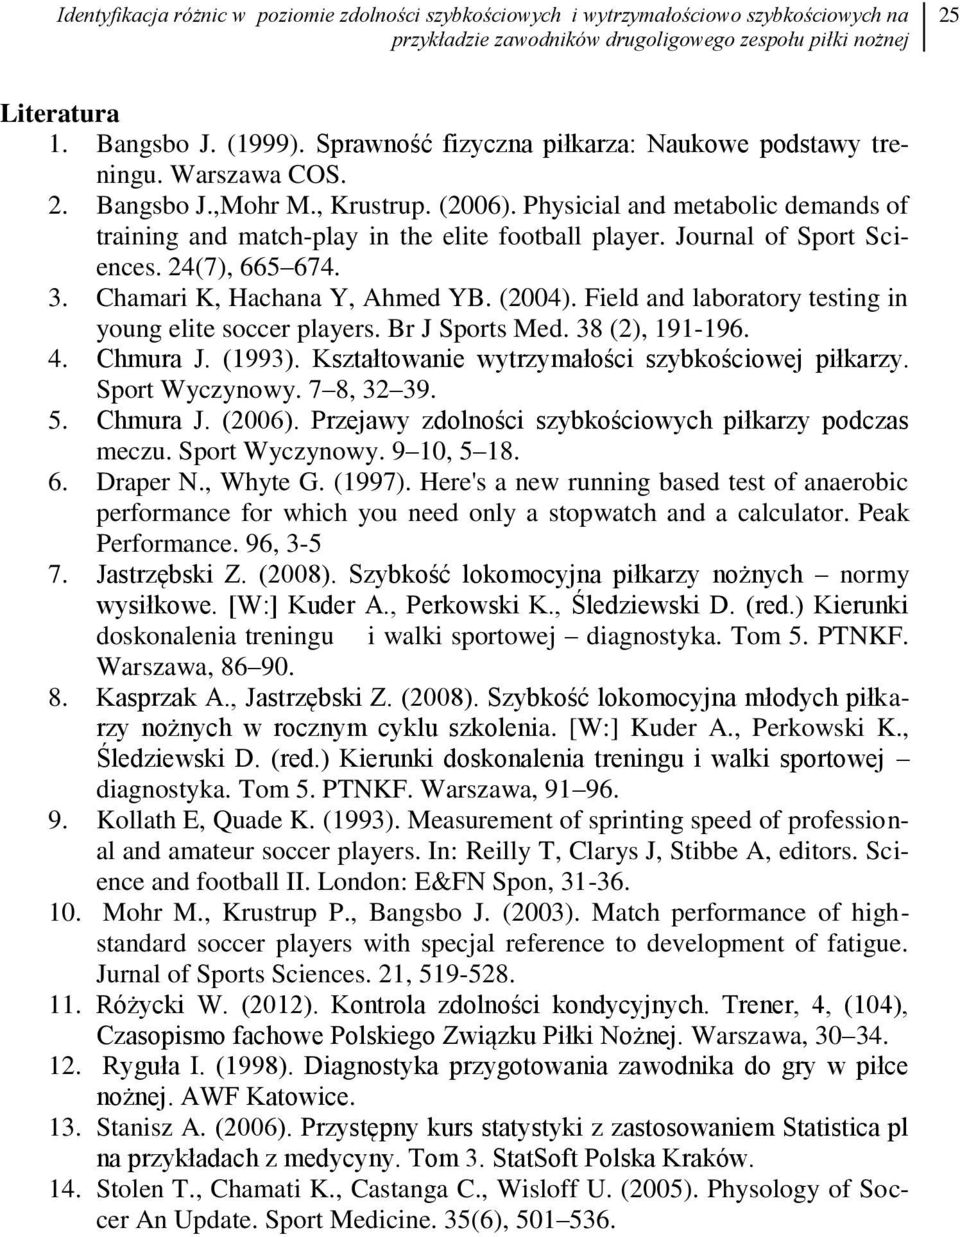 Journal of Sport Sciences. 24(7), 665 674. 3. Chamari K, Hachana Y, Ahmed YB. (2004). Field and laboratory testing in young elite soccer players. Br J Sports Med. 38 (2), 191-196. 4. Chmura J. (1993).